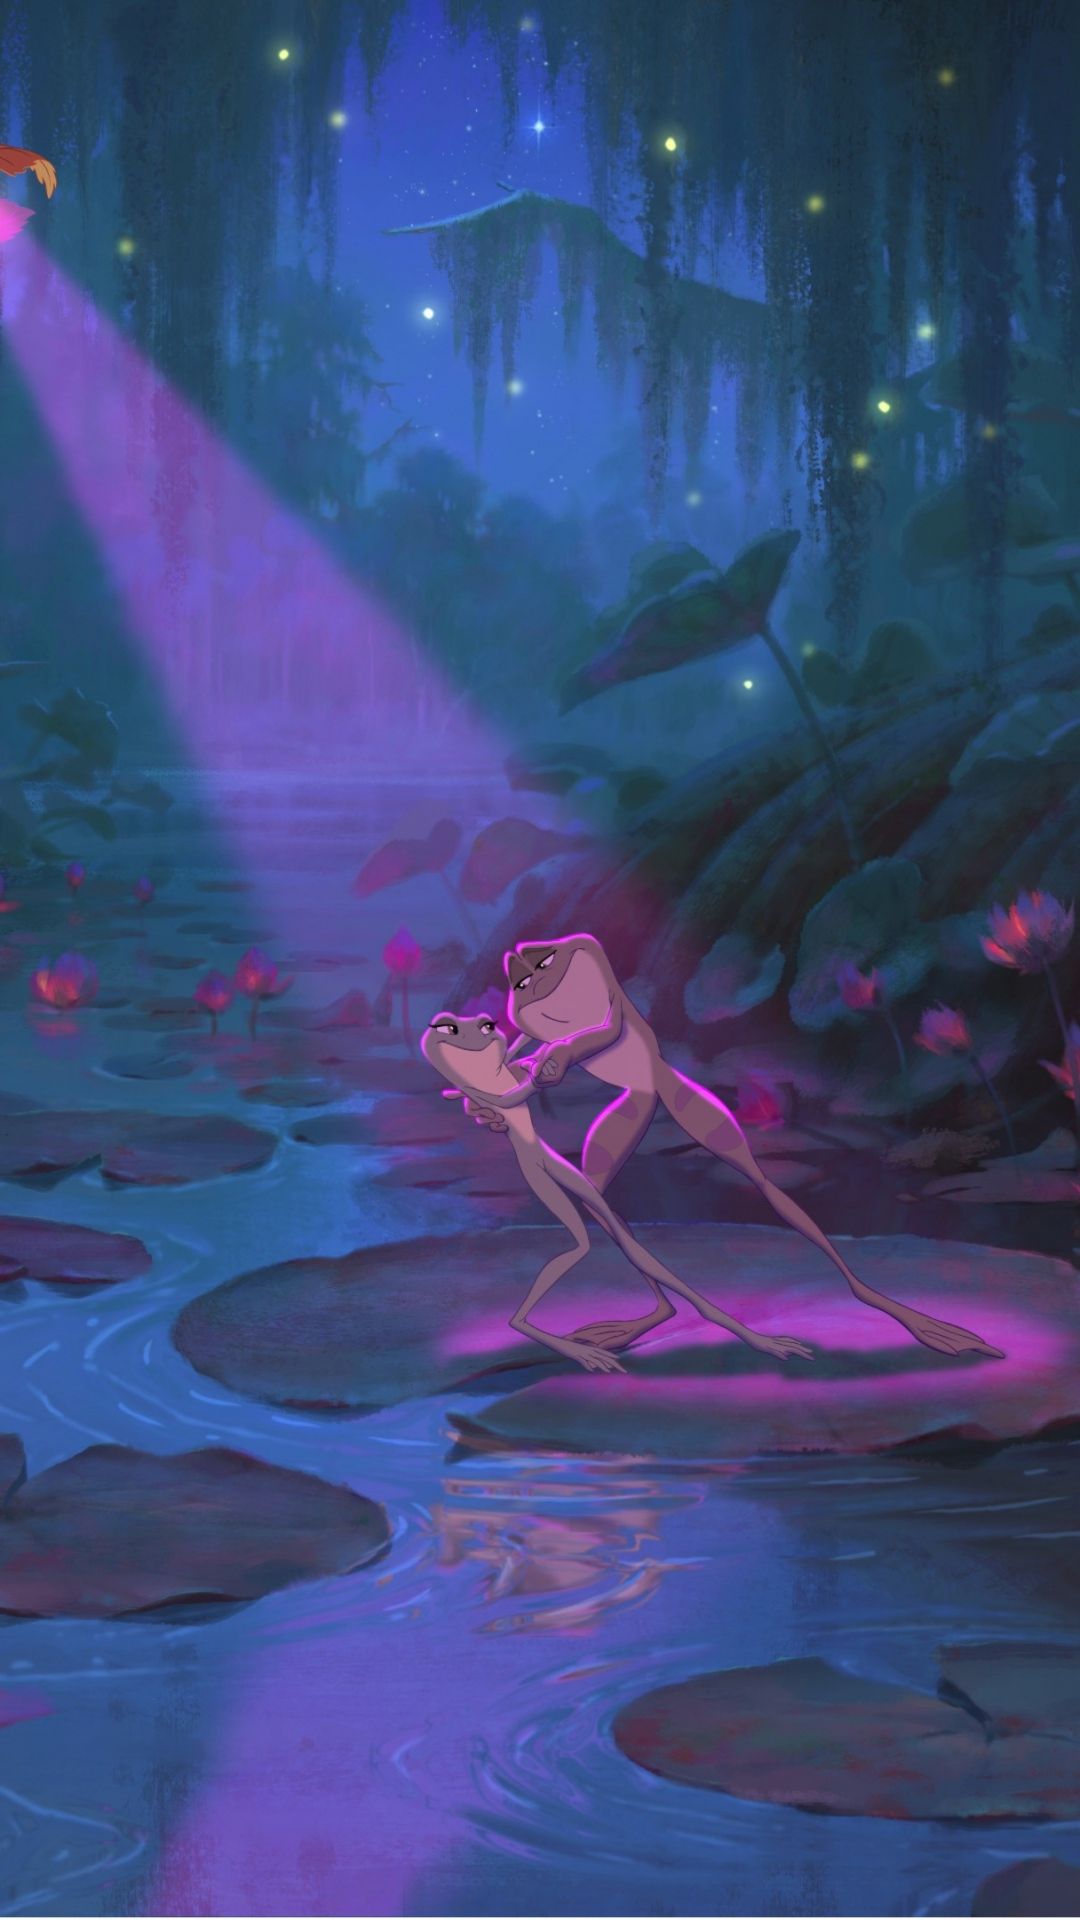 Download Wallpaper 1080x1920 The princess and the frog, Frog ...